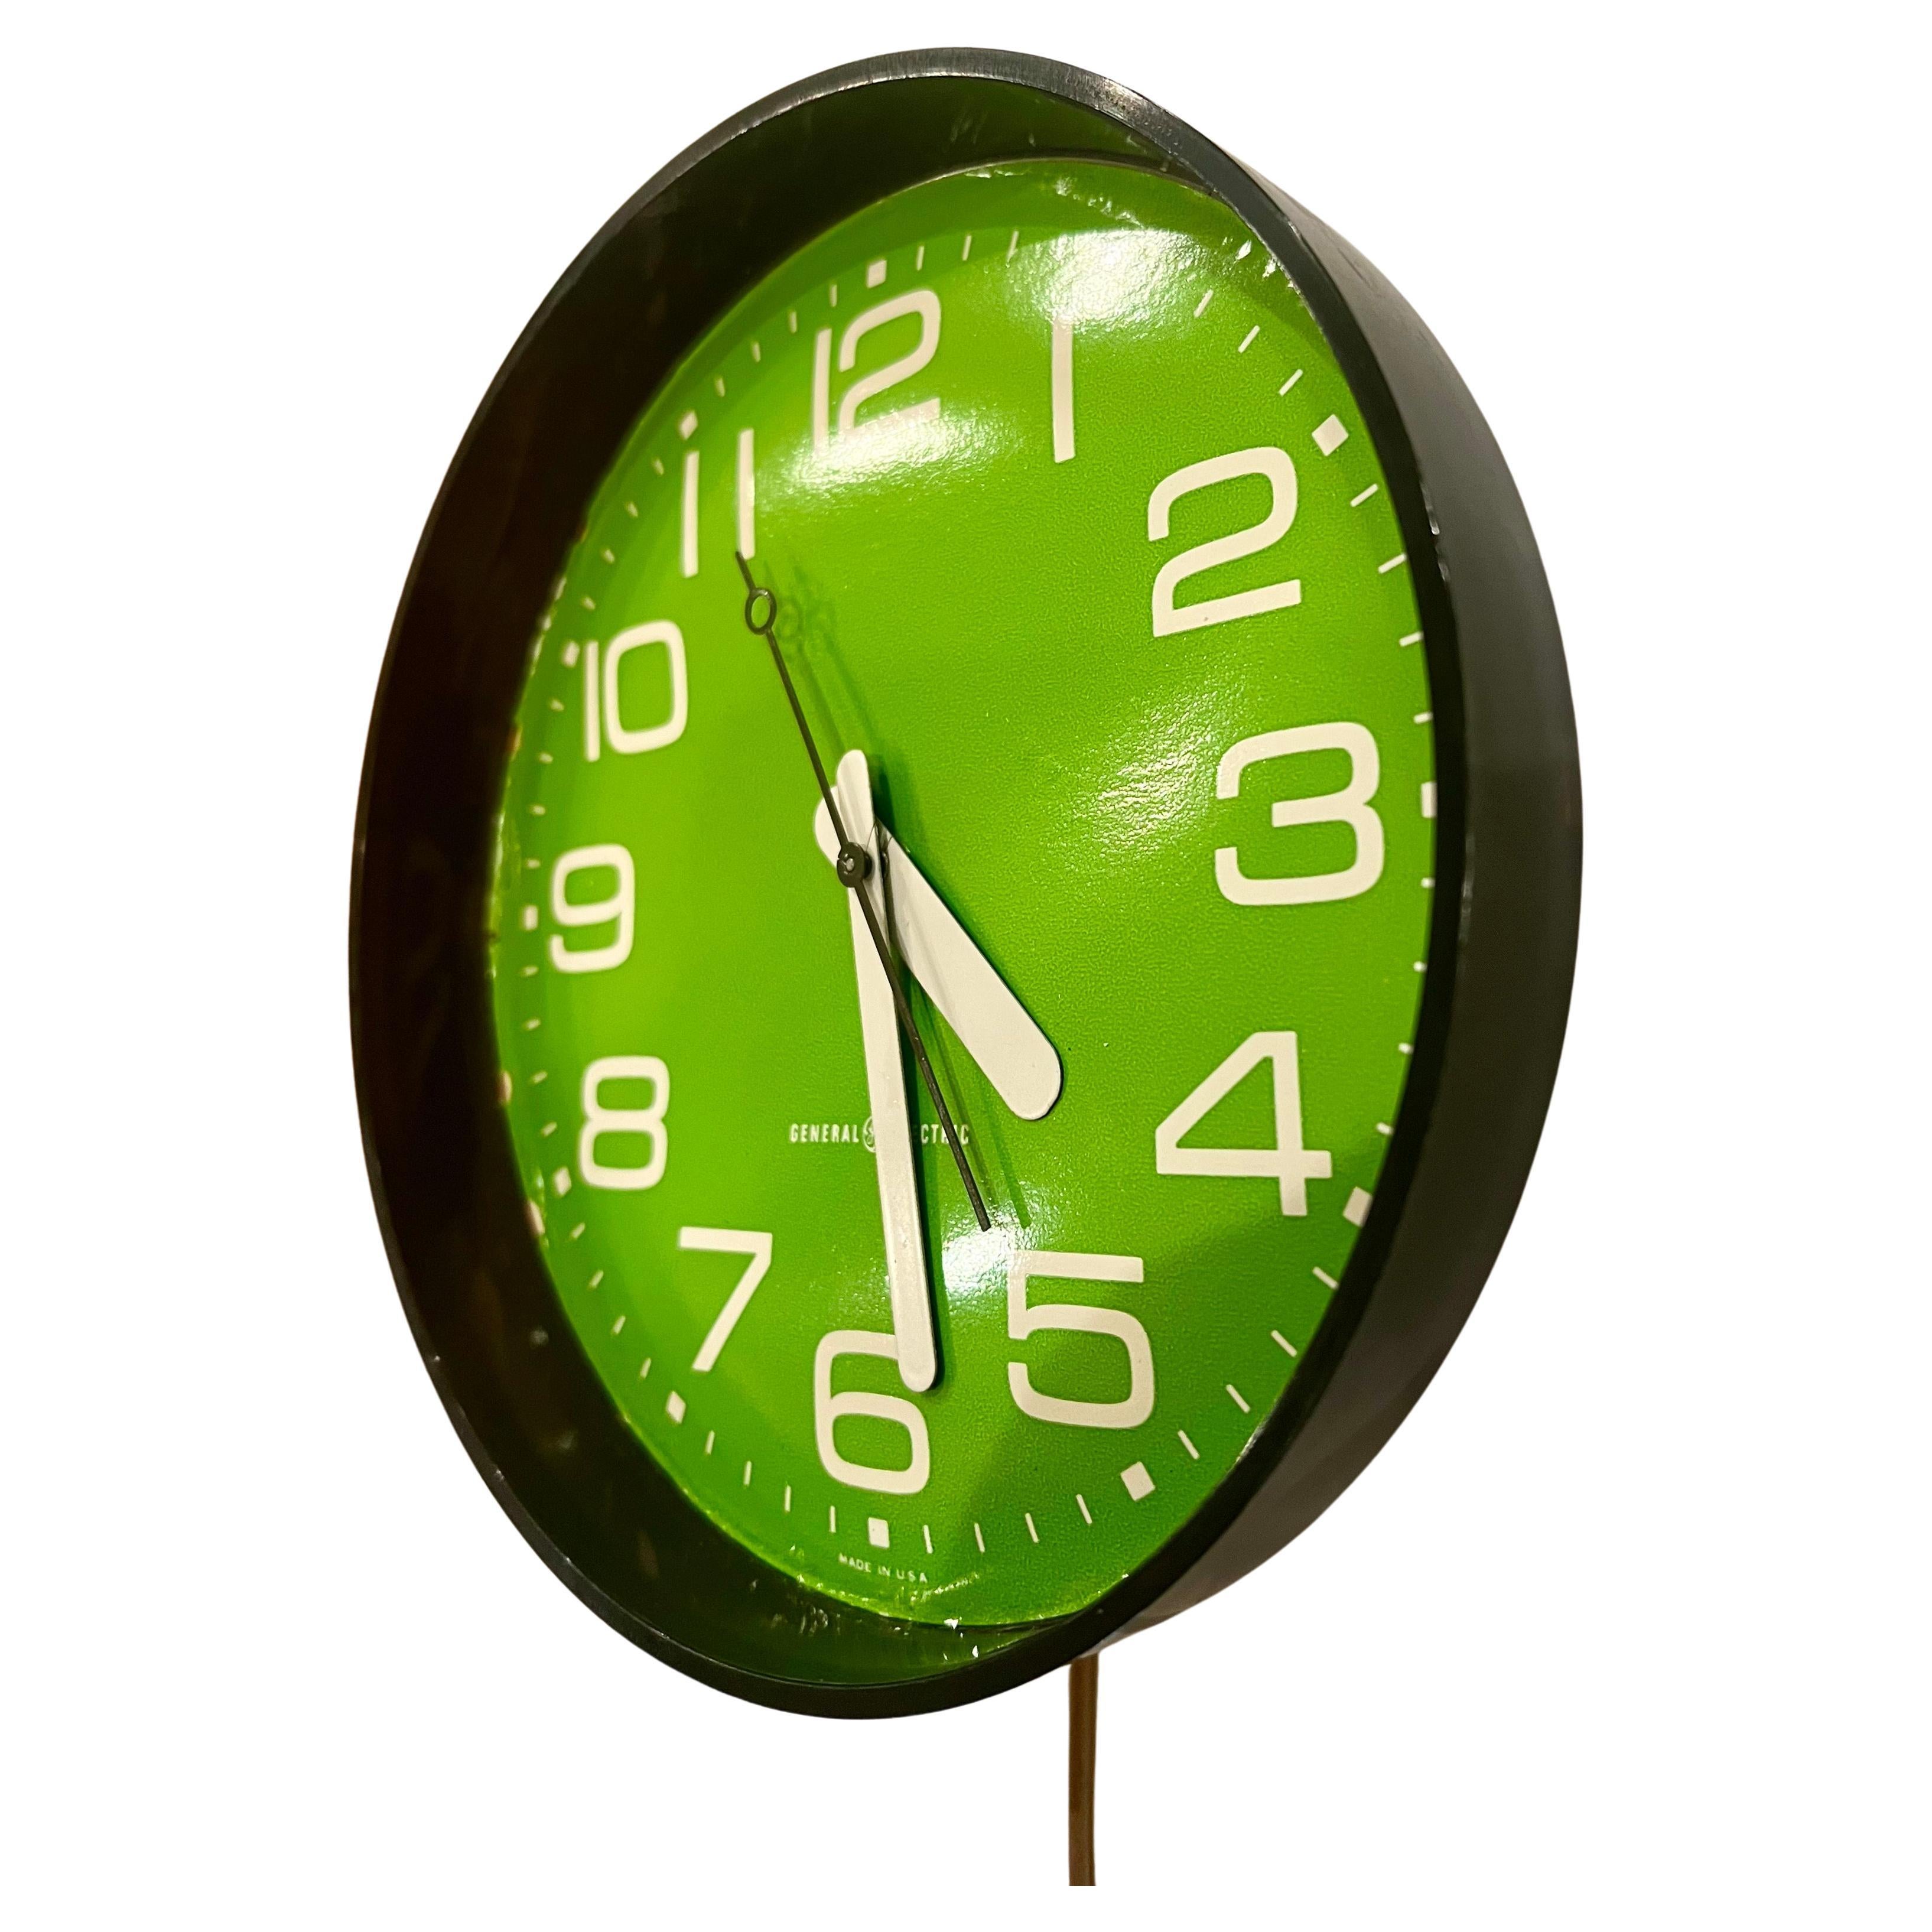 A very cool beautiful color Lime green plastic case with electric movement General Electric, wall clock in working condition original cord very nice simple design, and beautiful color. Great with mid-century Danish modern Postmodern home decor.